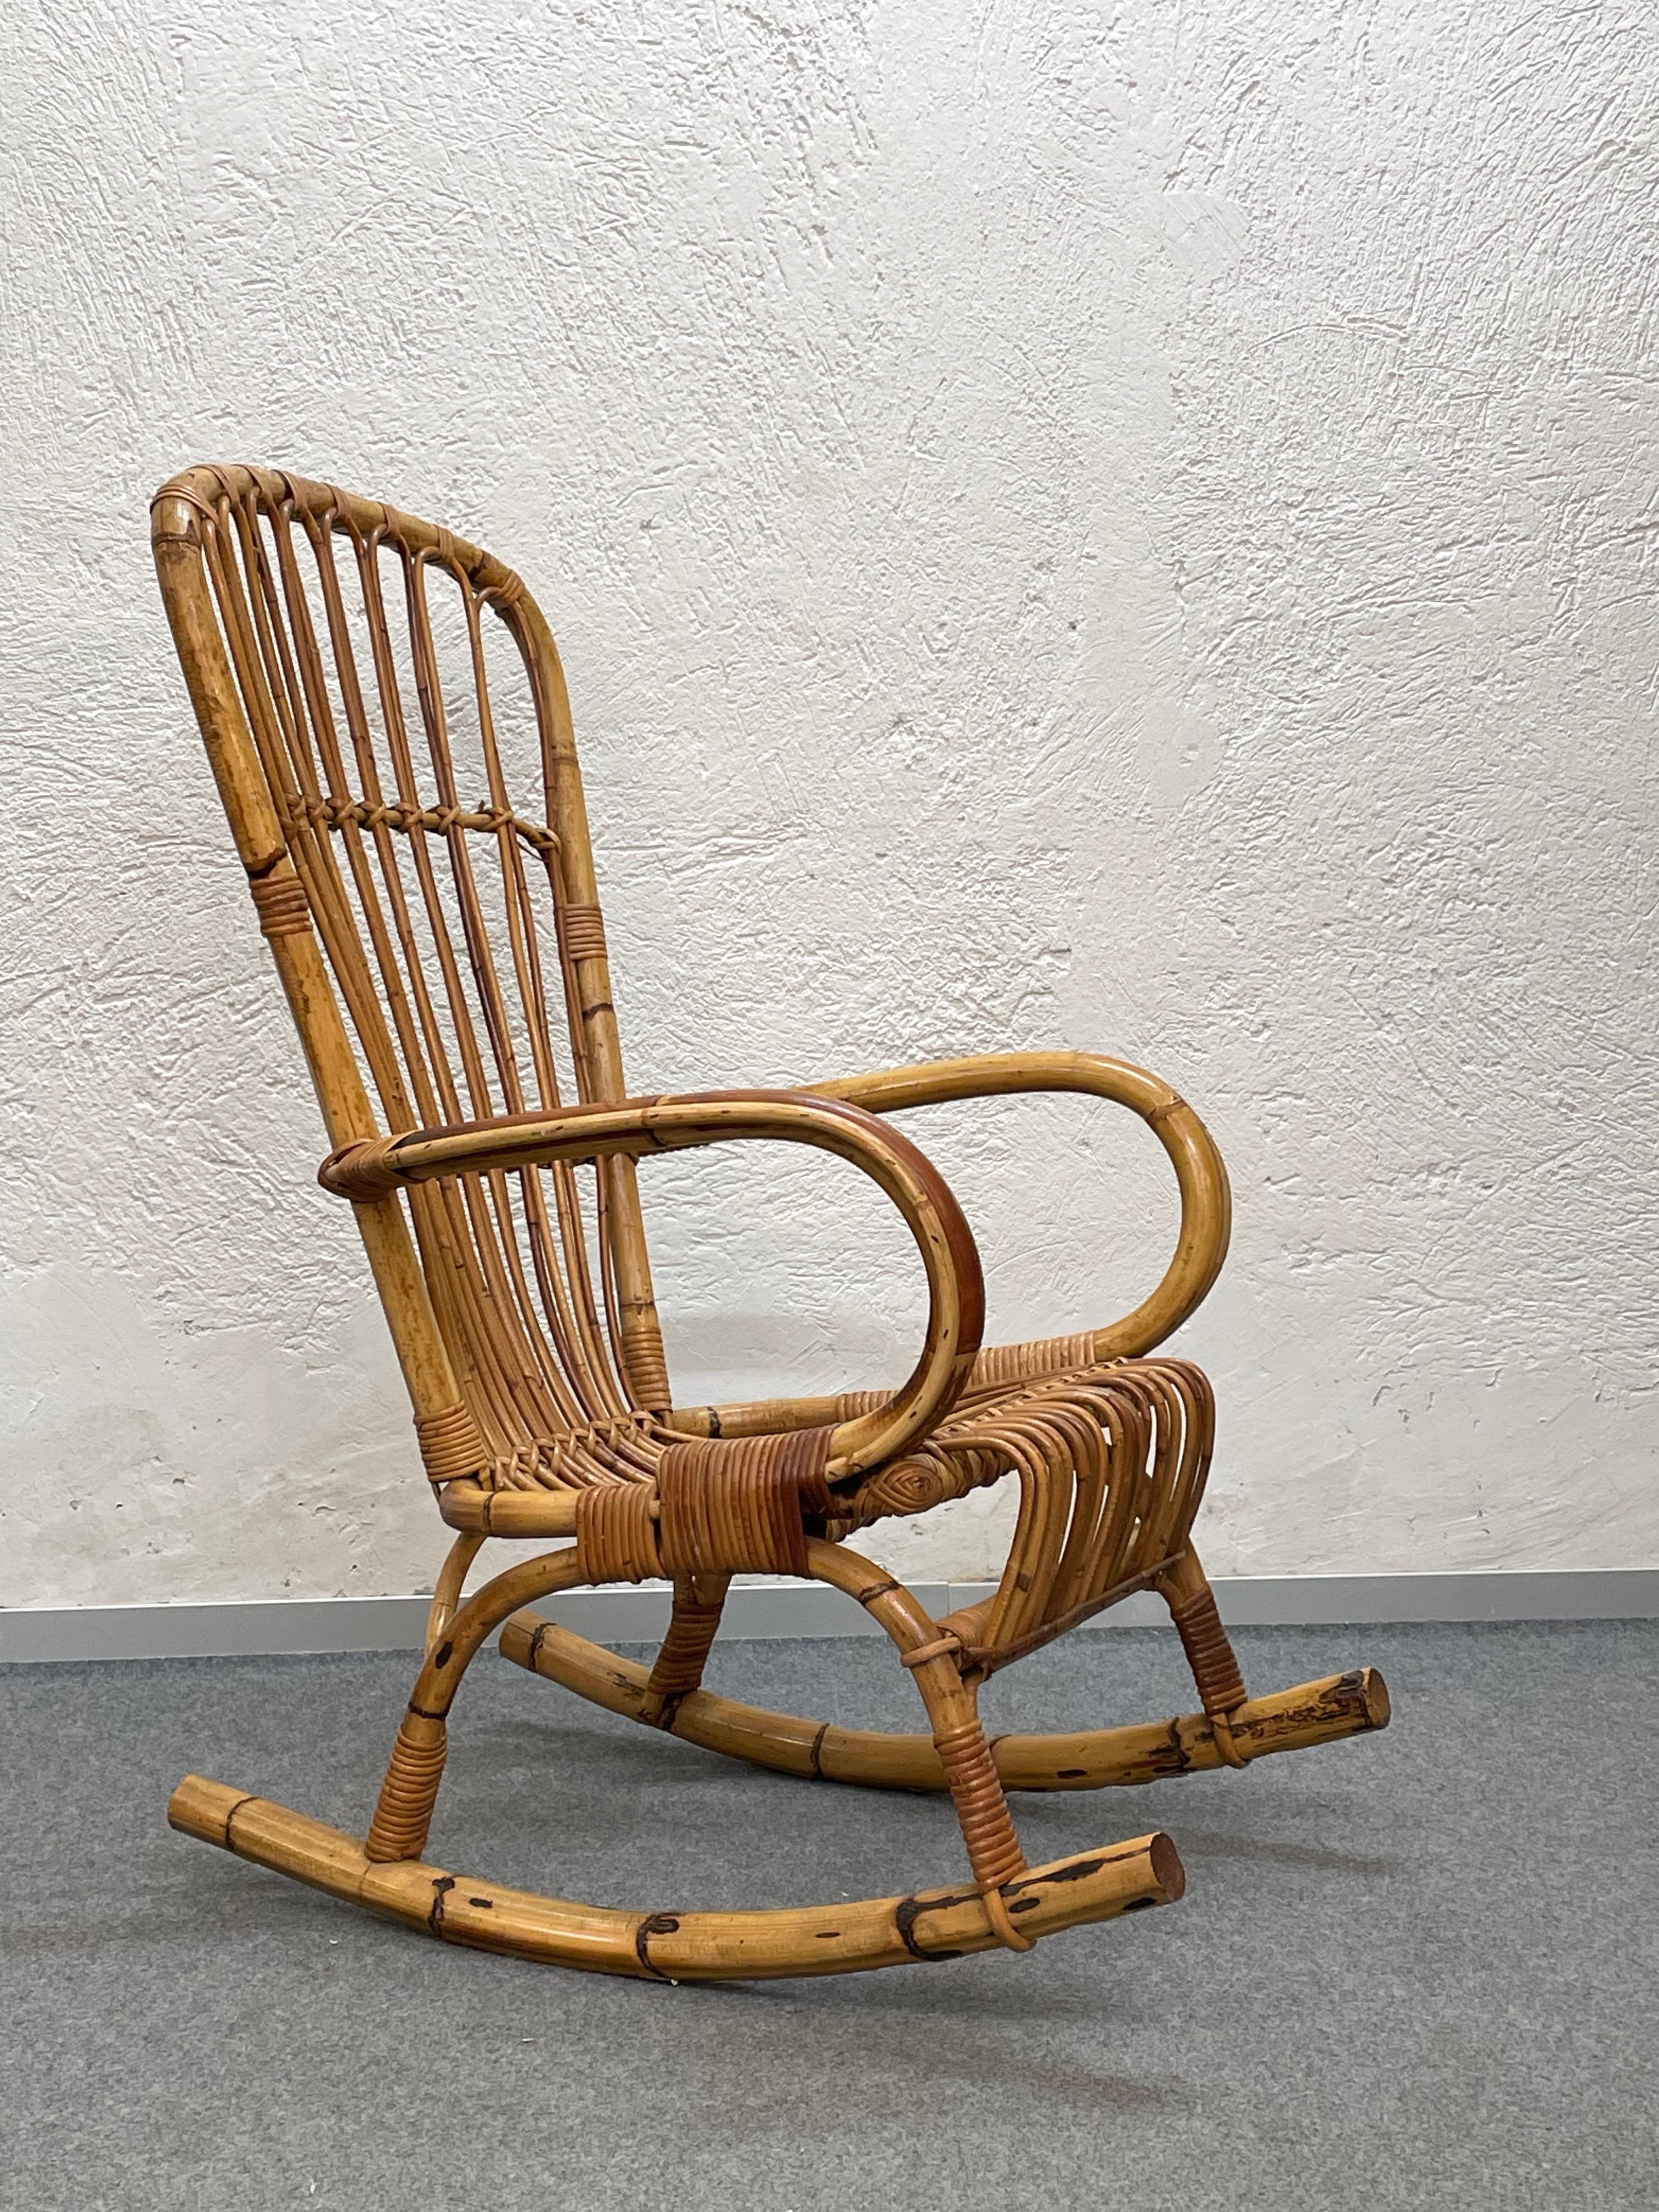 Elegant midcentury French Riviera rattan, bamboo and hand-woven wicker rocking chair. This fantastic piece was designed and manufactured in Italy during the 1960s.

This armchair has a beautiful structure in curved bamboo, enriched with beautiful